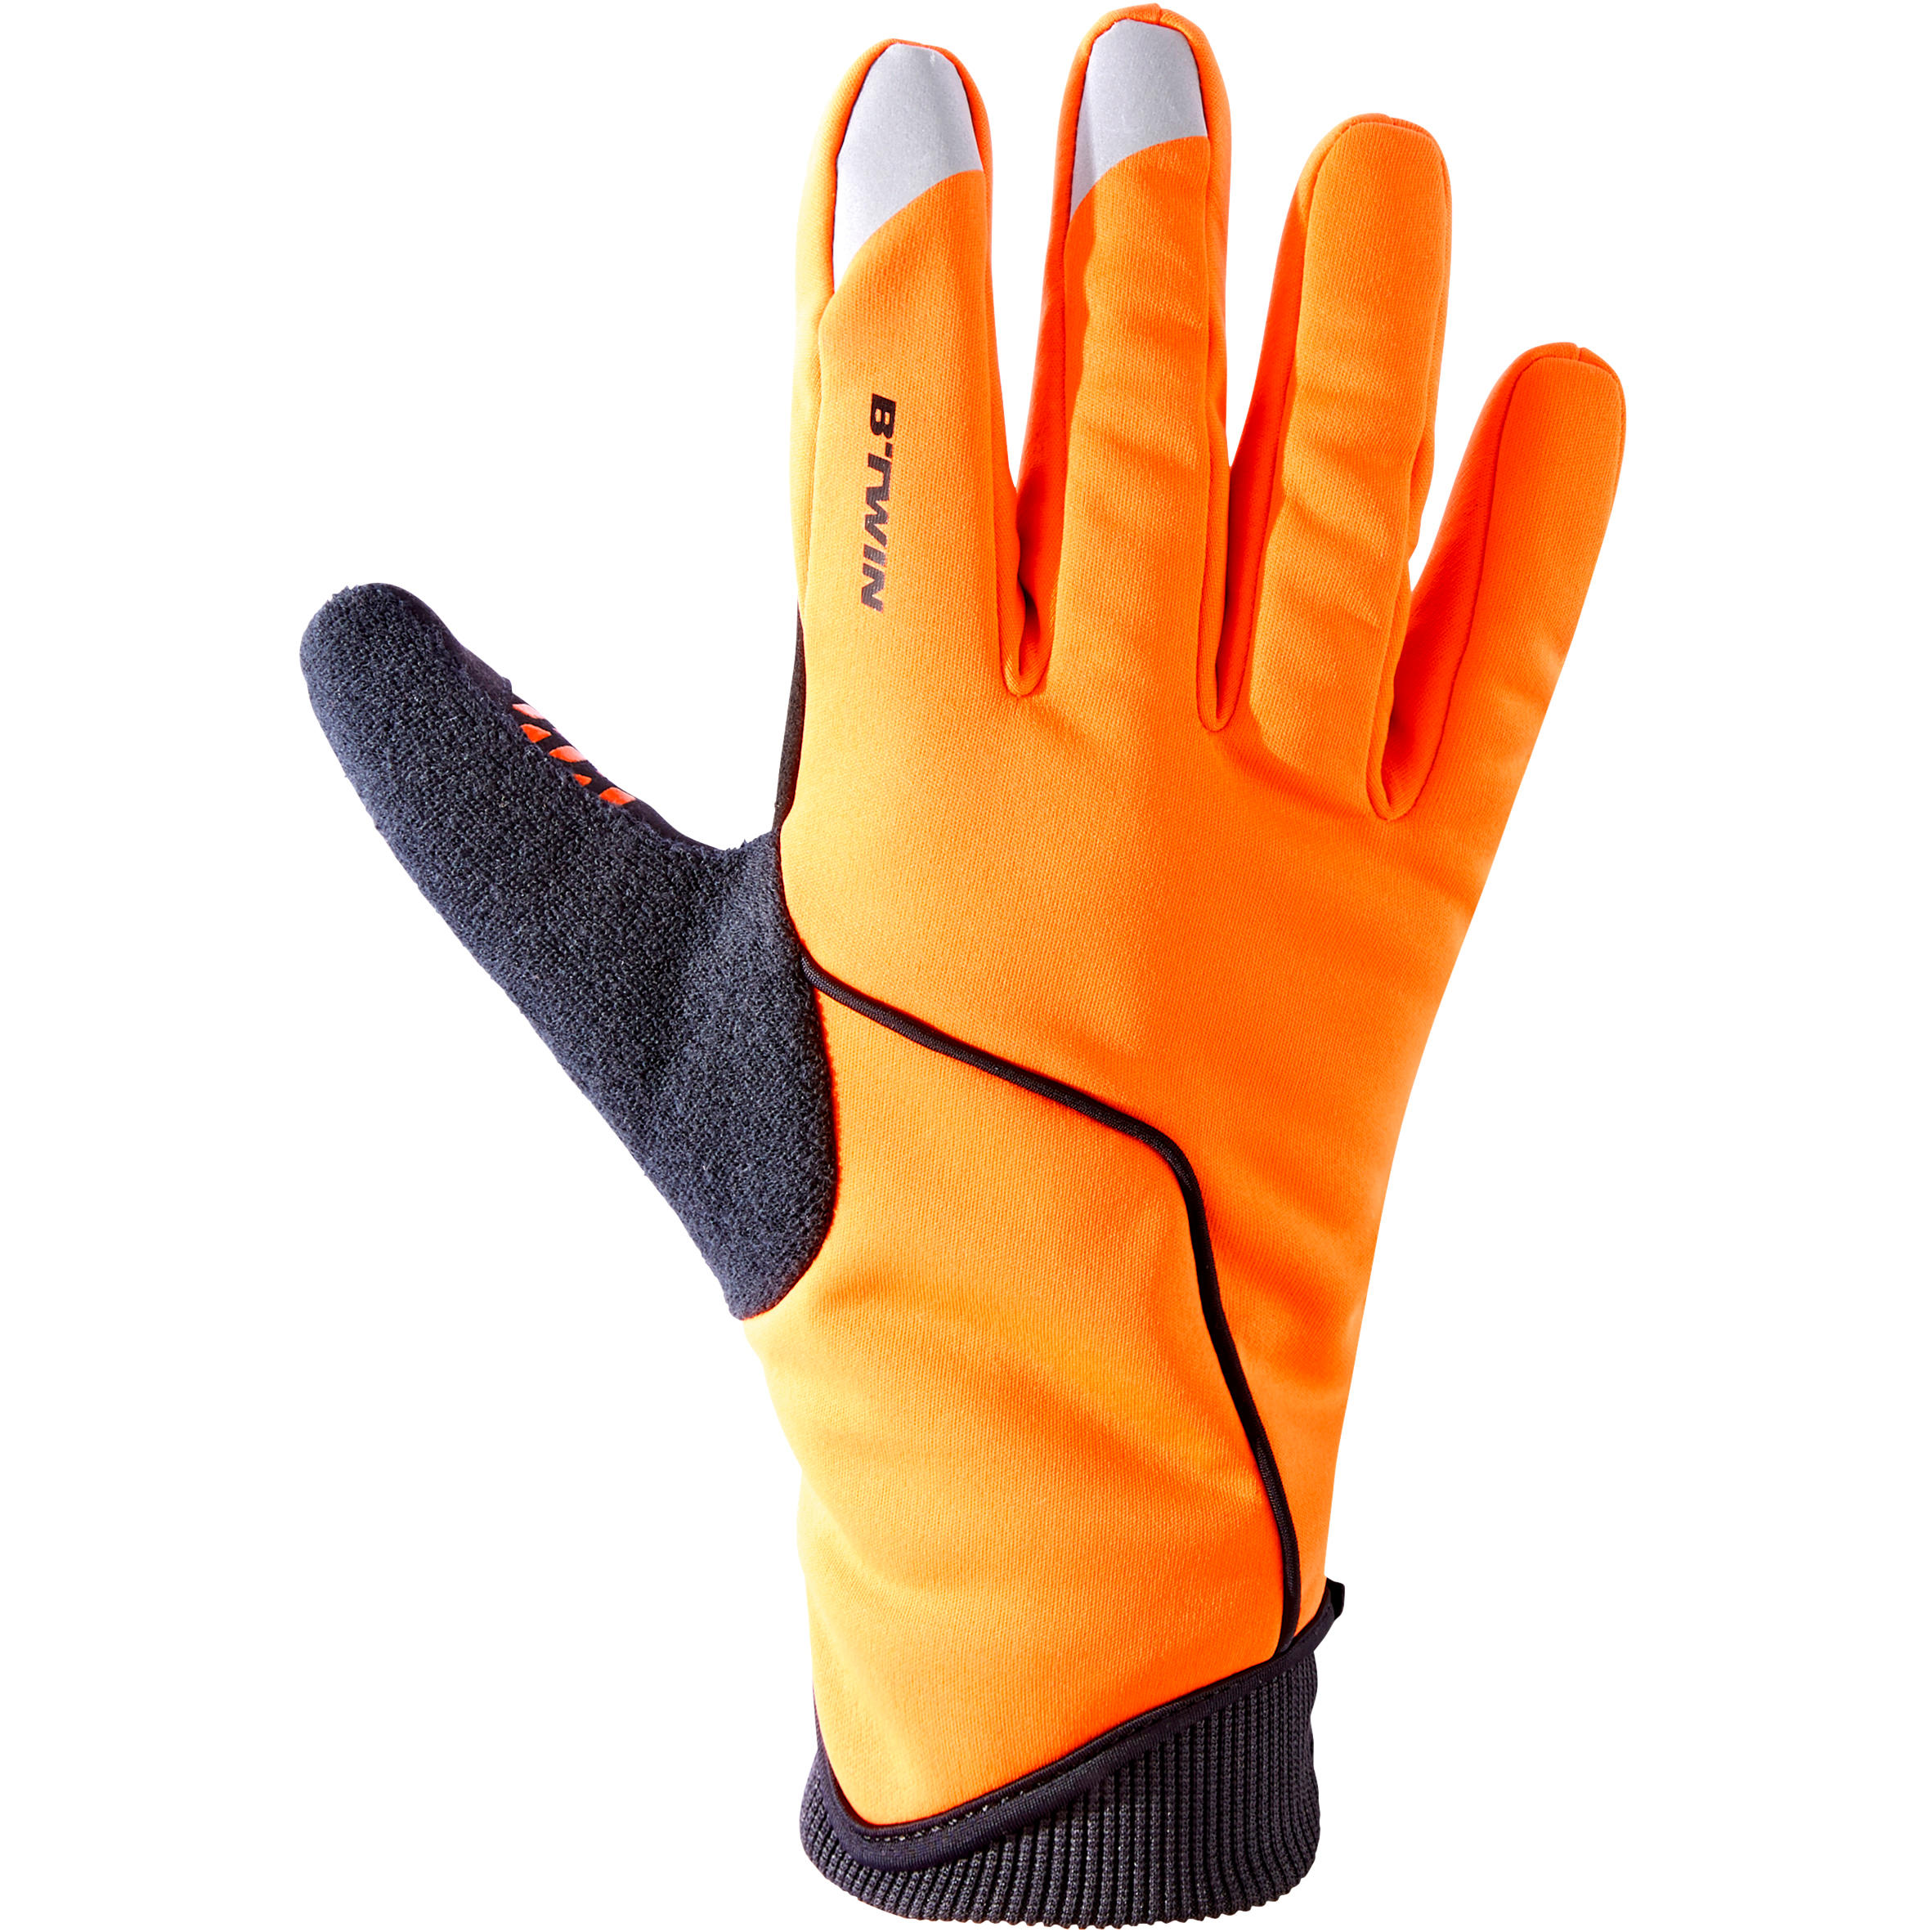 triban 900 winter cycling gloves